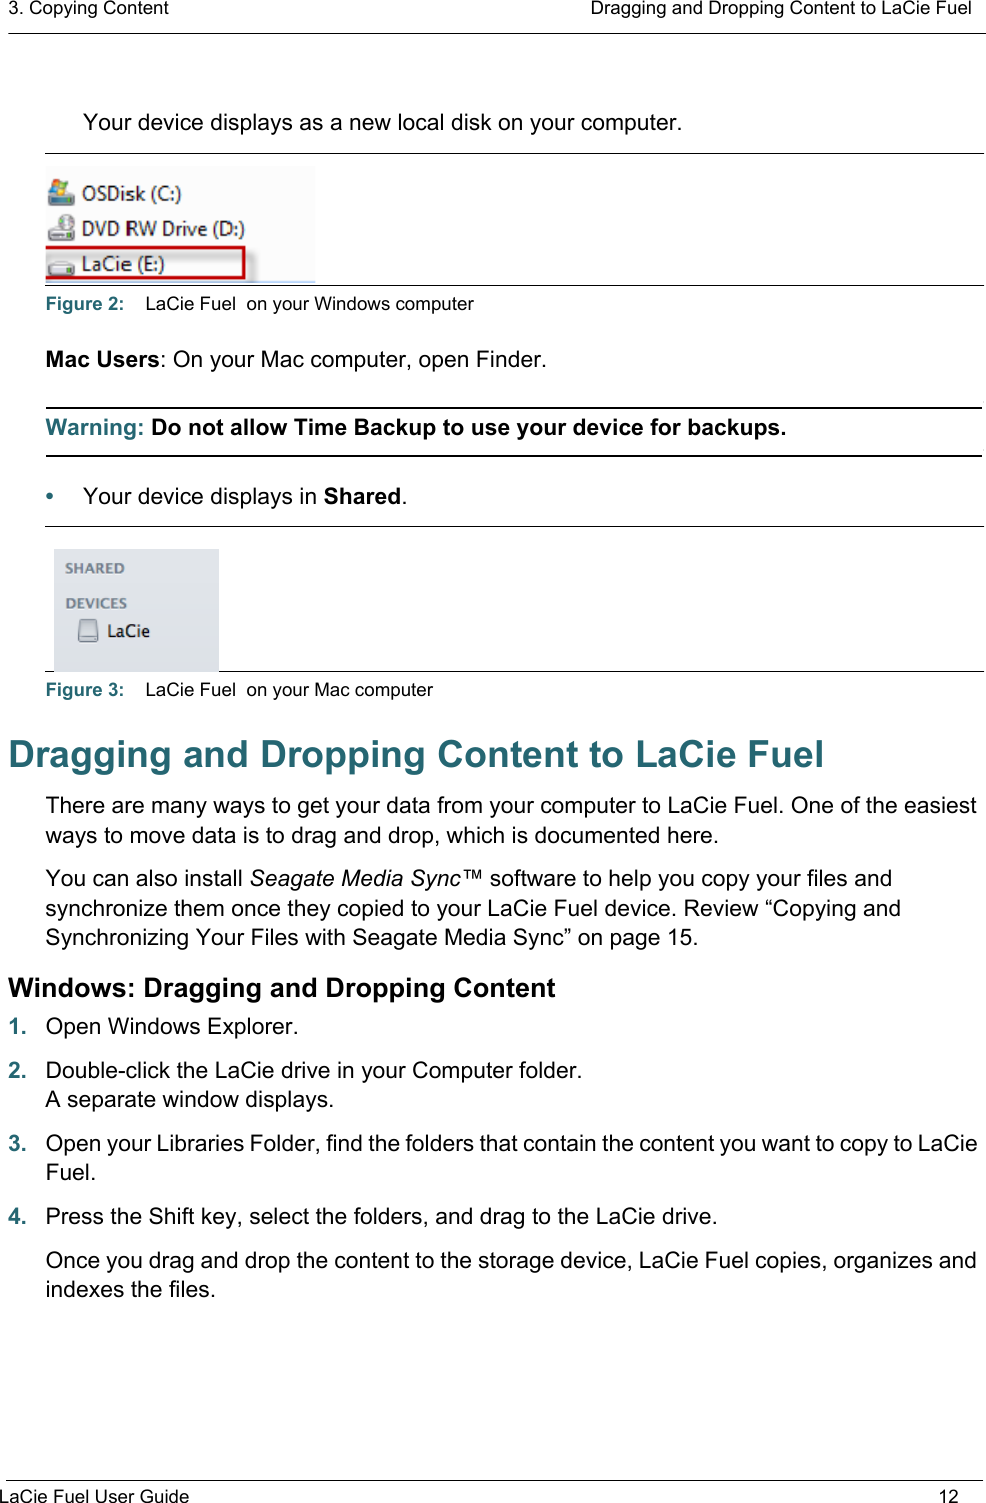 3. Copying Content  Dragging and Dropping Content to LaCie FuelLaCie Fuel User Guide 12Your device displays as a new local disk on your computer. Mac Users: On your Mac computer, open Finder.Warning: Do not allow Time Backup to use your device for backups.•Your device displays in Shared. Dragging and Dropping Content to LaCie FuelThere are many ways to get your data from your computer to LaCie Fuel. One of the easiest ways to move data is to drag and drop, which is documented here.You can also install Seagate Media Sync™ software to help you copy your files and synchronize them once they copied to your LaCie Fuel device. Review “Copying and Synchronizing Your Files with Seagate Media Sync” on page 15.Windows: Dragging and Dropping Content1. Open Windows Explorer.2. Double-click the LaCie drive in your Computer folder.A separate window displays.3. Open your Libraries Folder, find the folders that contain the content you want to copy to LaCie Fuel.4. Press the Shift key, select the folders, and drag to the LaCie drive.Once you drag and drop the content to the storage device, LaCie Fuel copies, organizes and indexes the files.Figure 2:    LaCie Fuel  on your Windows computerFigure 3:    LaCie Fuel  on your Mac computer